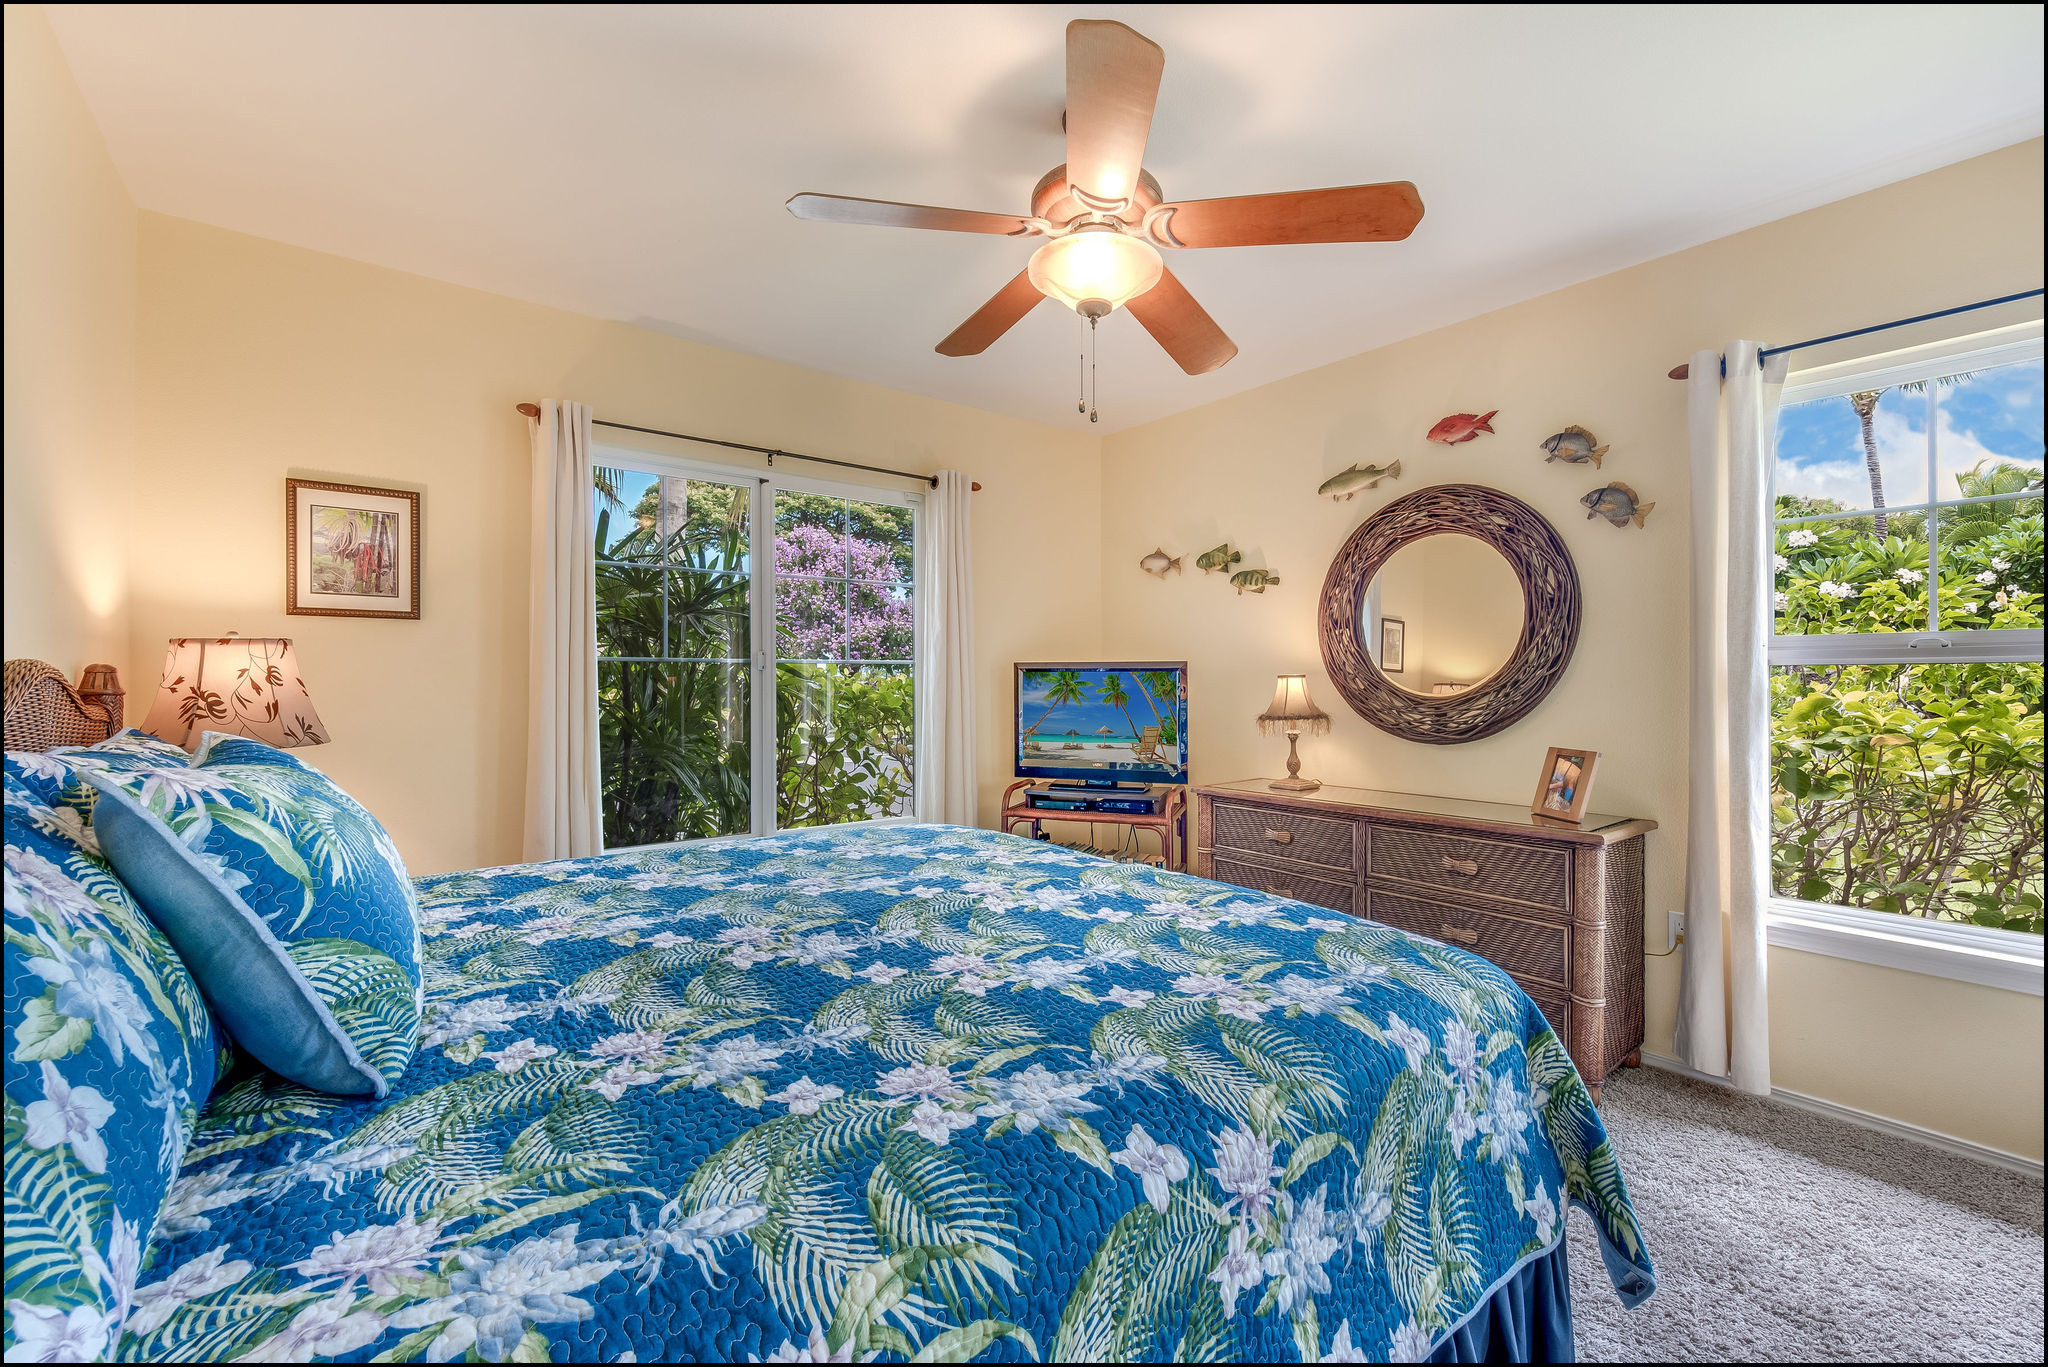 Ground floor second bedroom with windows on two sides has bright Hawaiian decor plus TV, DVD player and ceiling fan